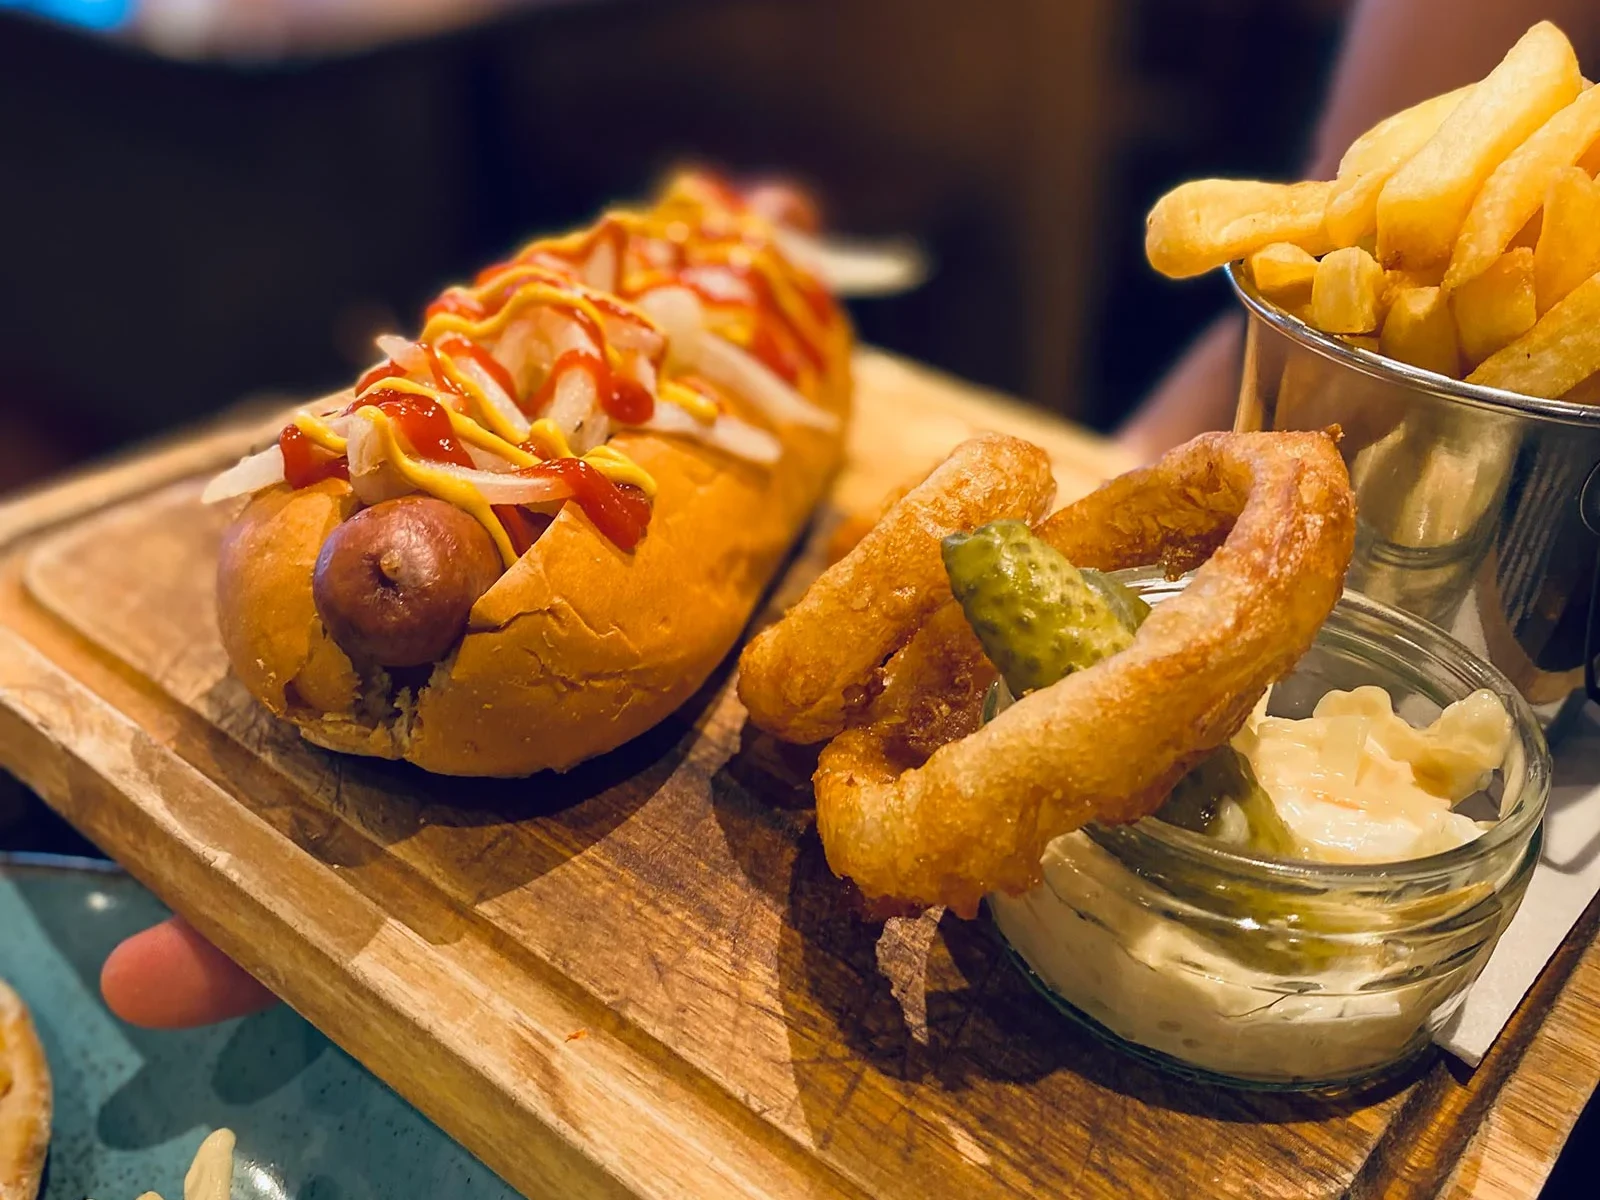 hot dog, onion rings, chips